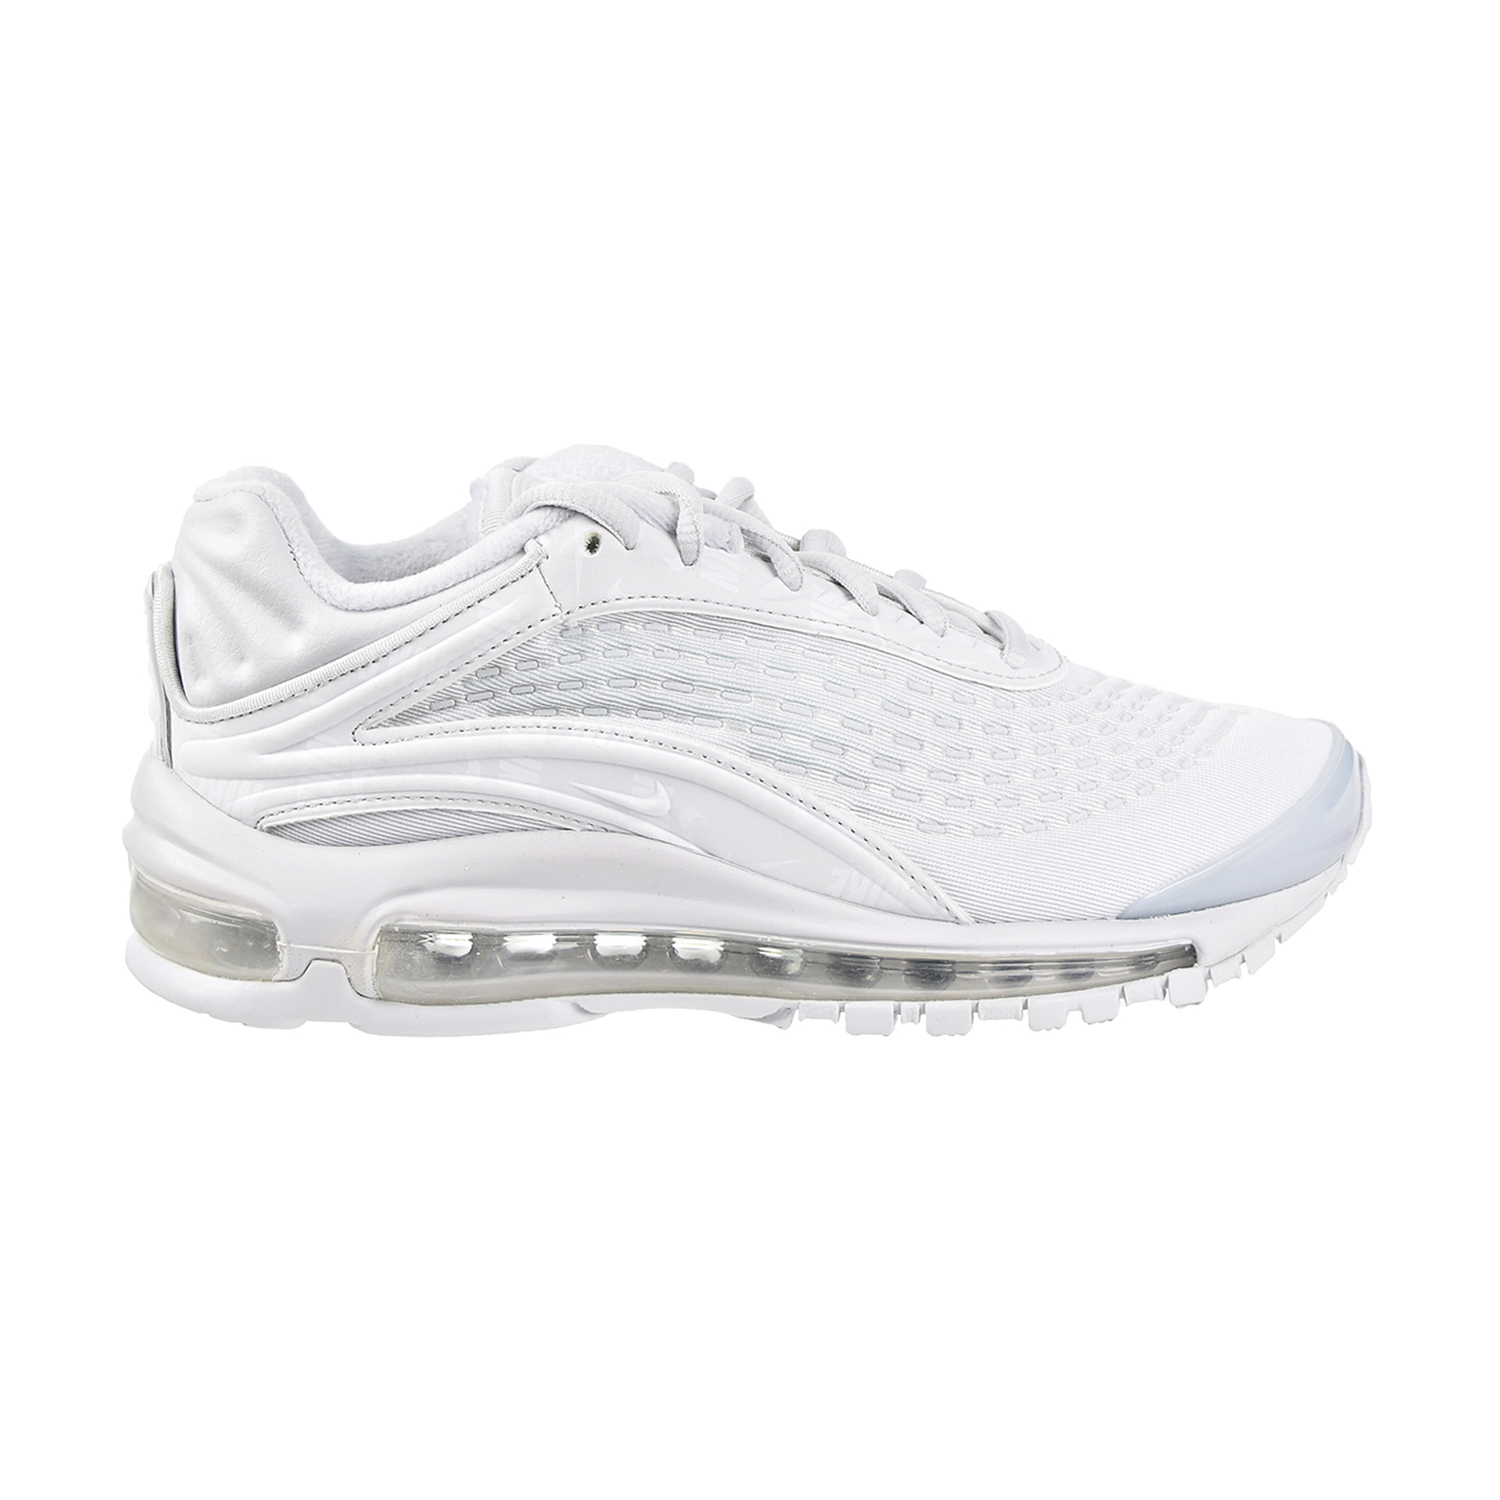 Nike Air Max Deluxe SE Women's Shoes Pure Platinum at8692-002 - image 1 of 6